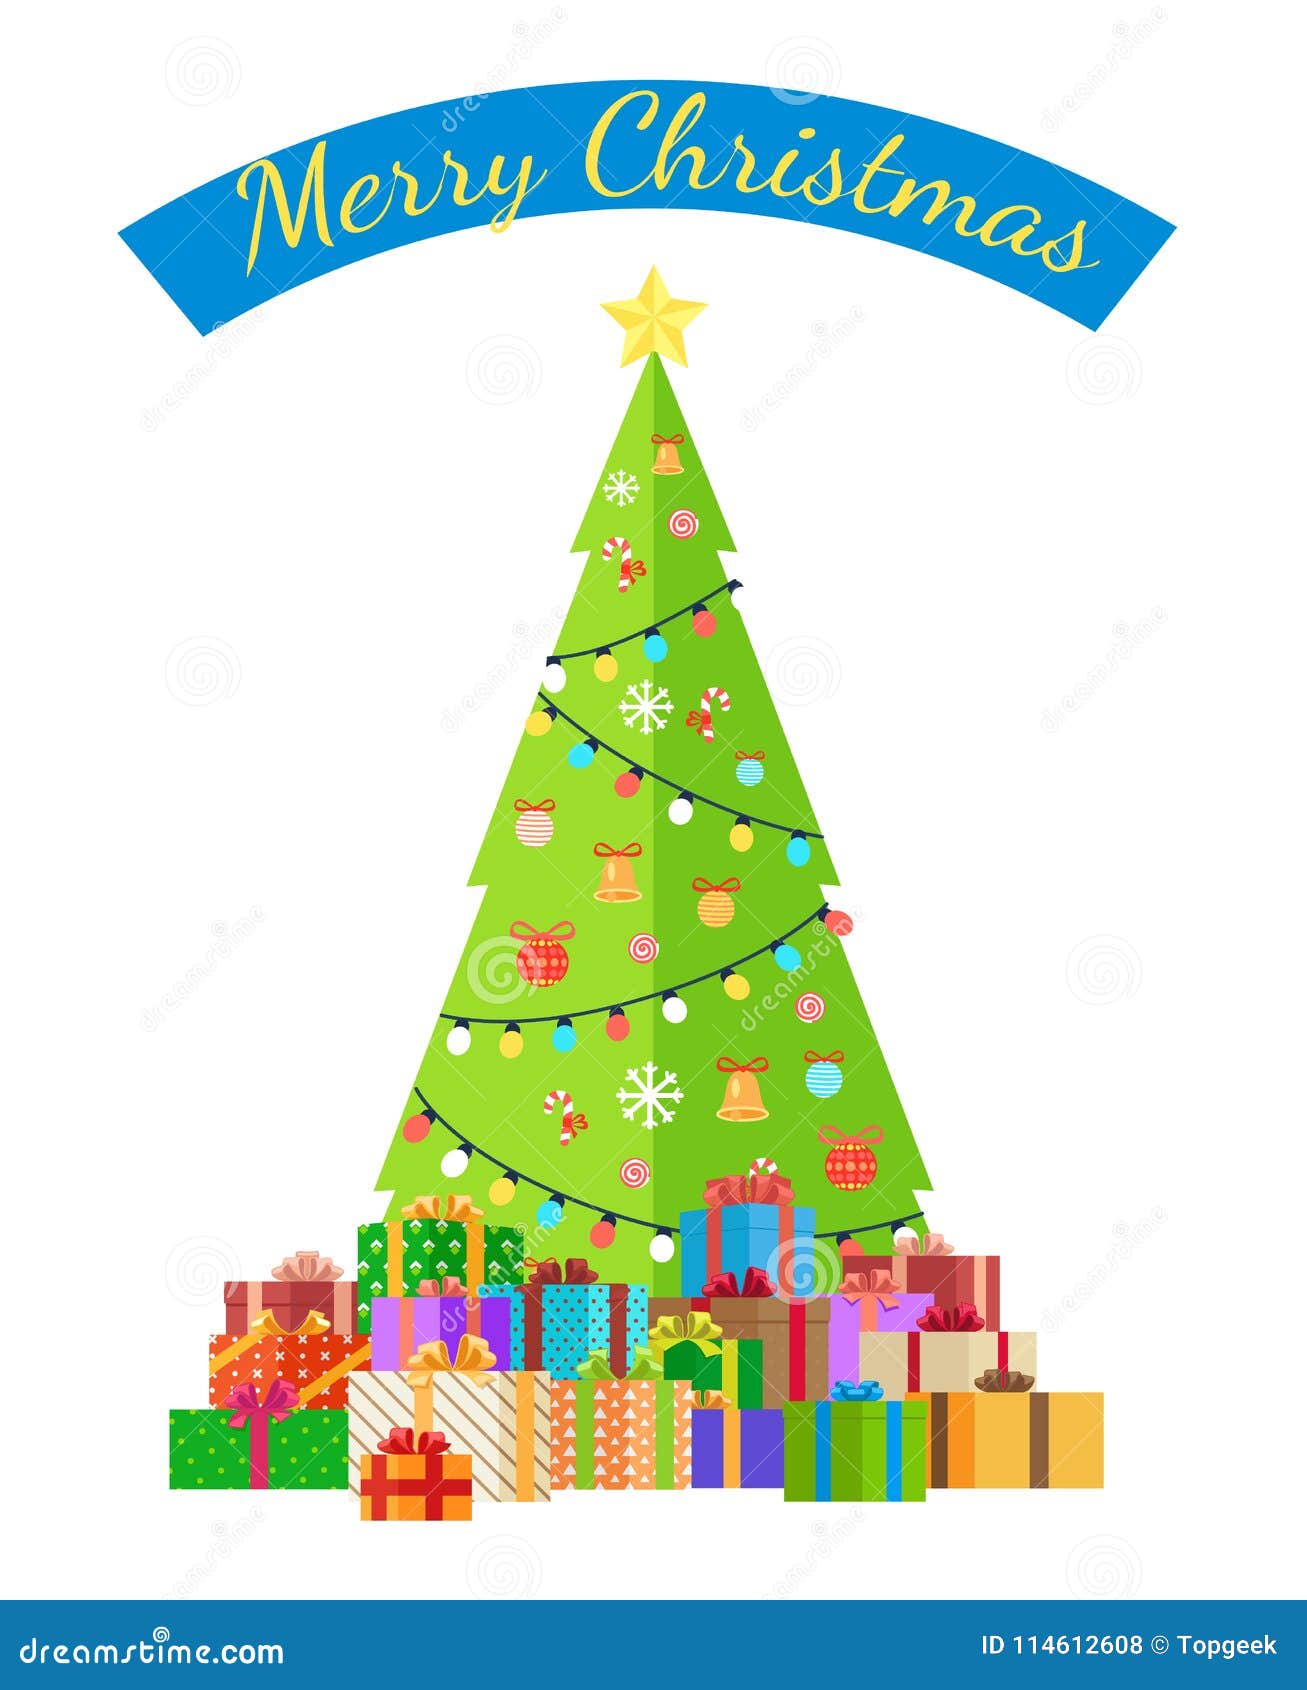 Merry Christmas Poster with Decorated Tree by Garlands Stock Vector ...